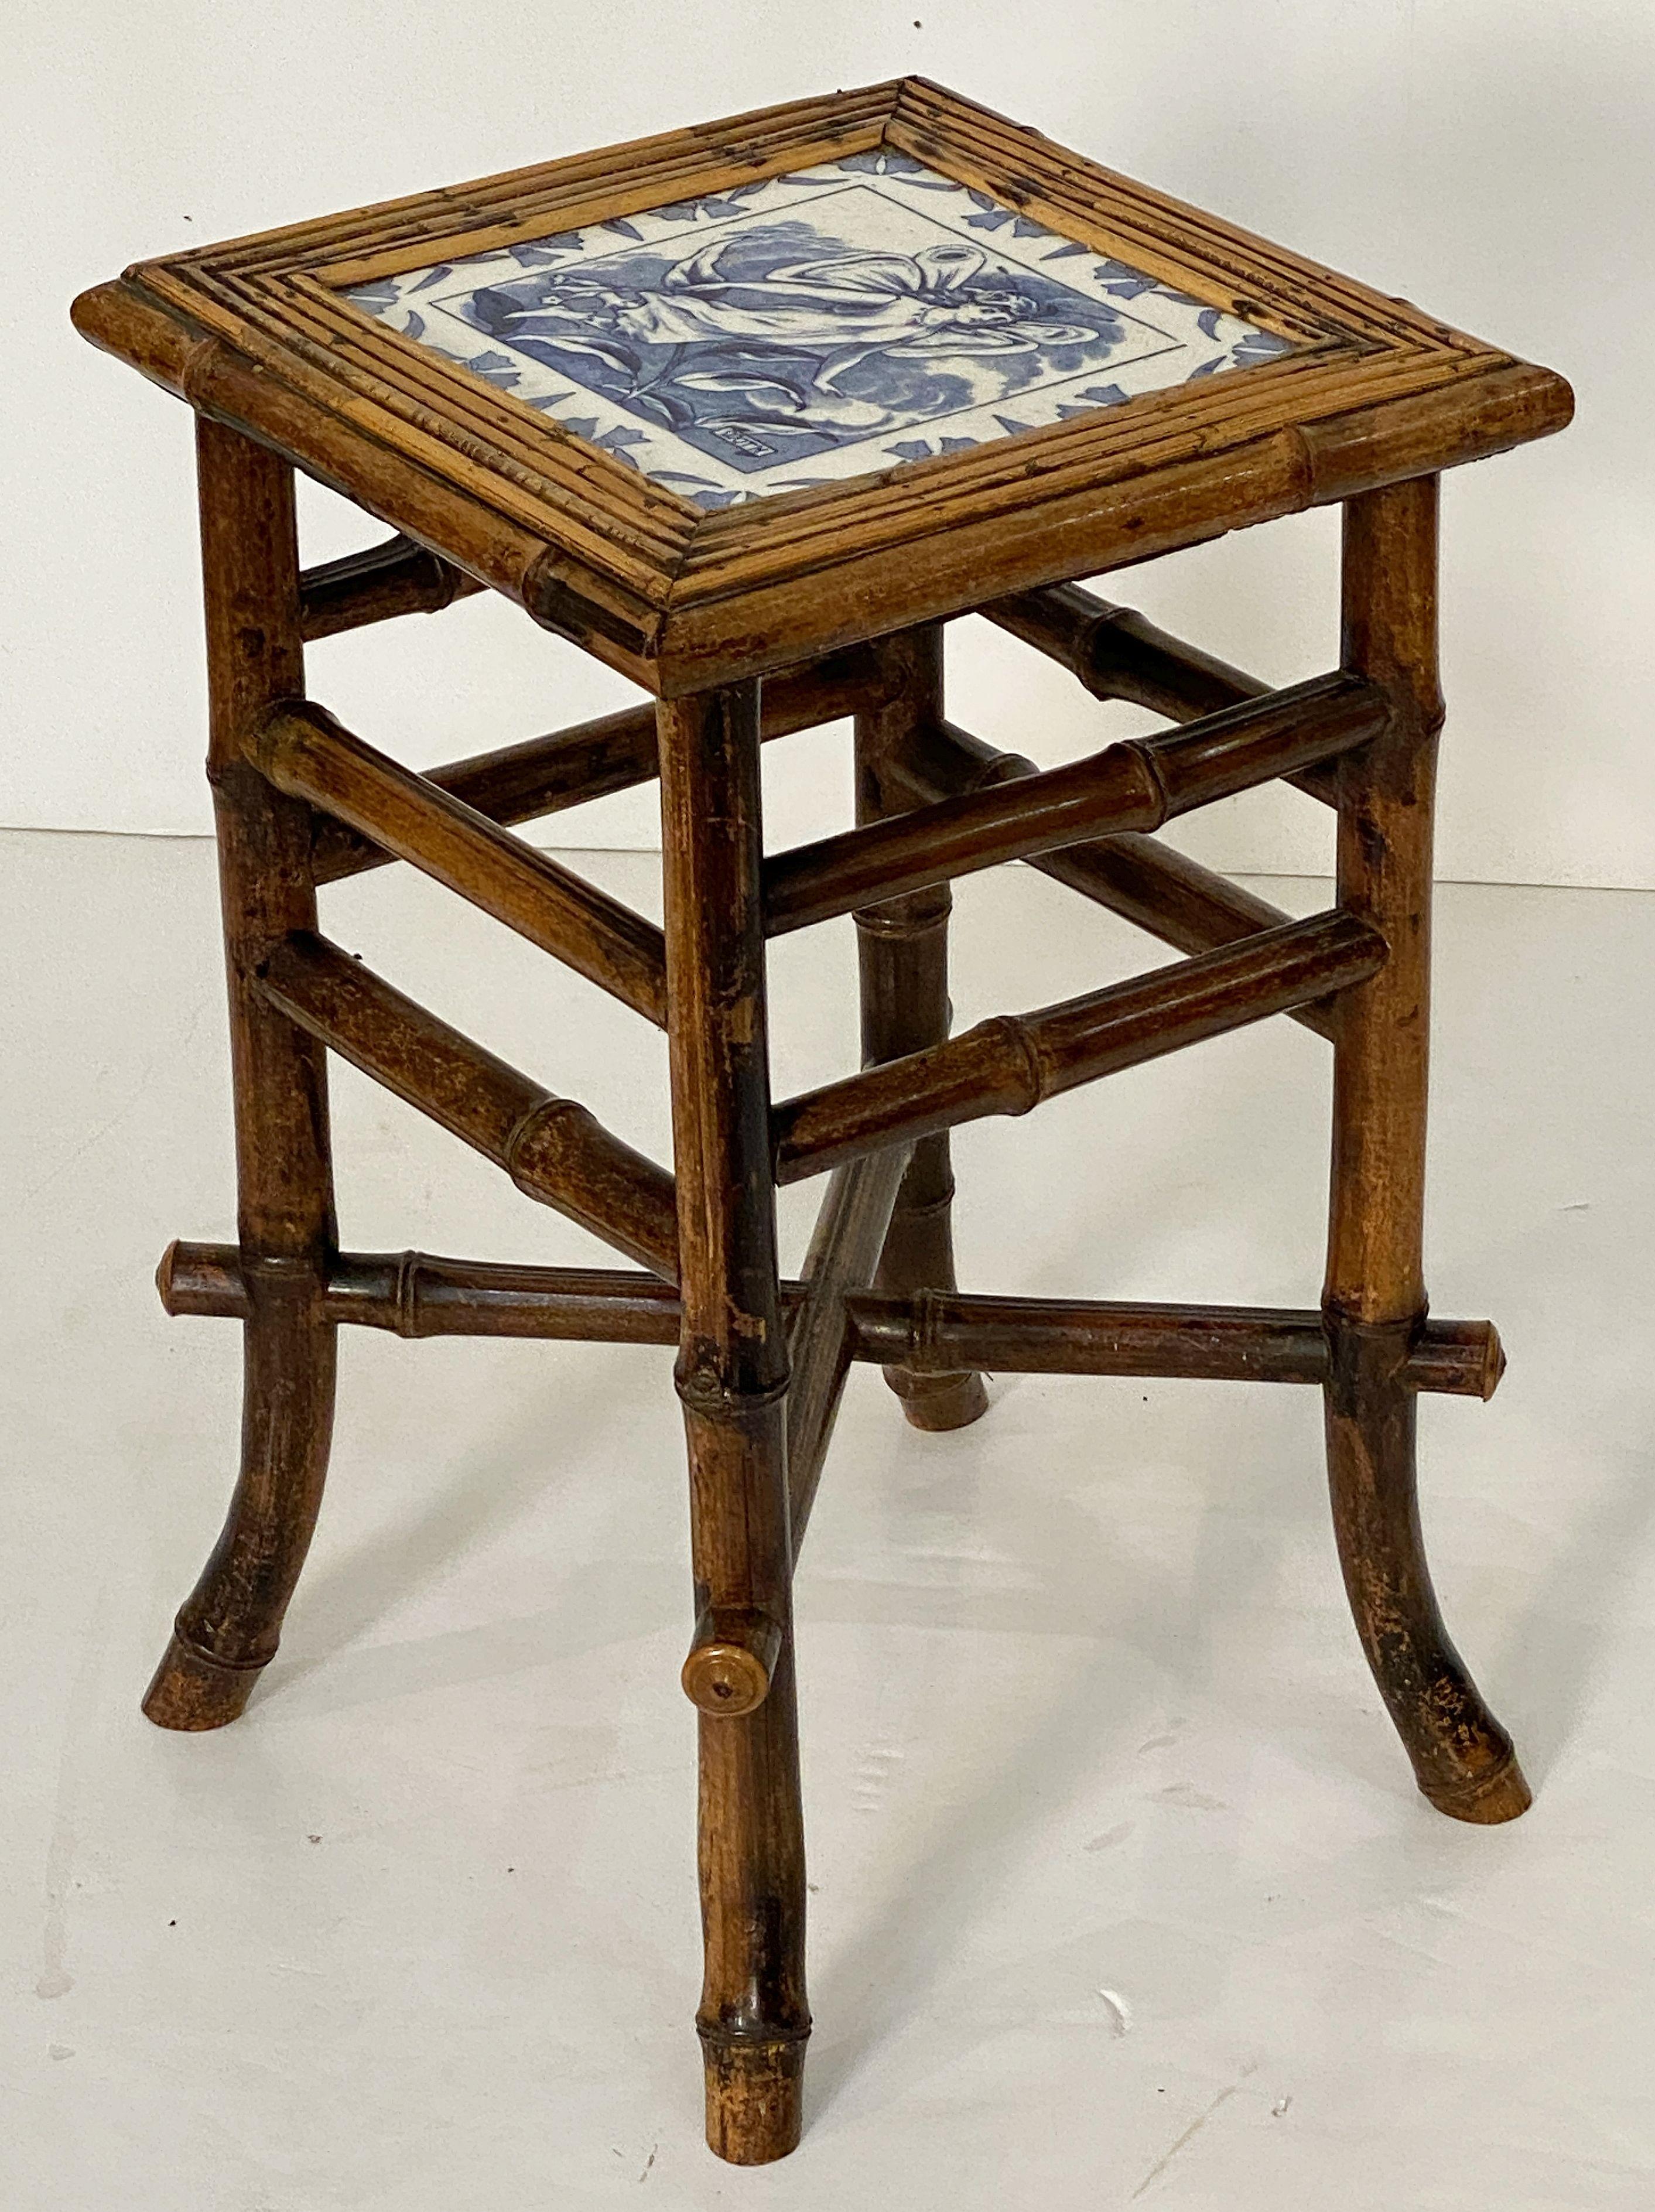 English Bamboo Table or Stool with Tile Seat from the Aesthetic Movement Era For Sale 2